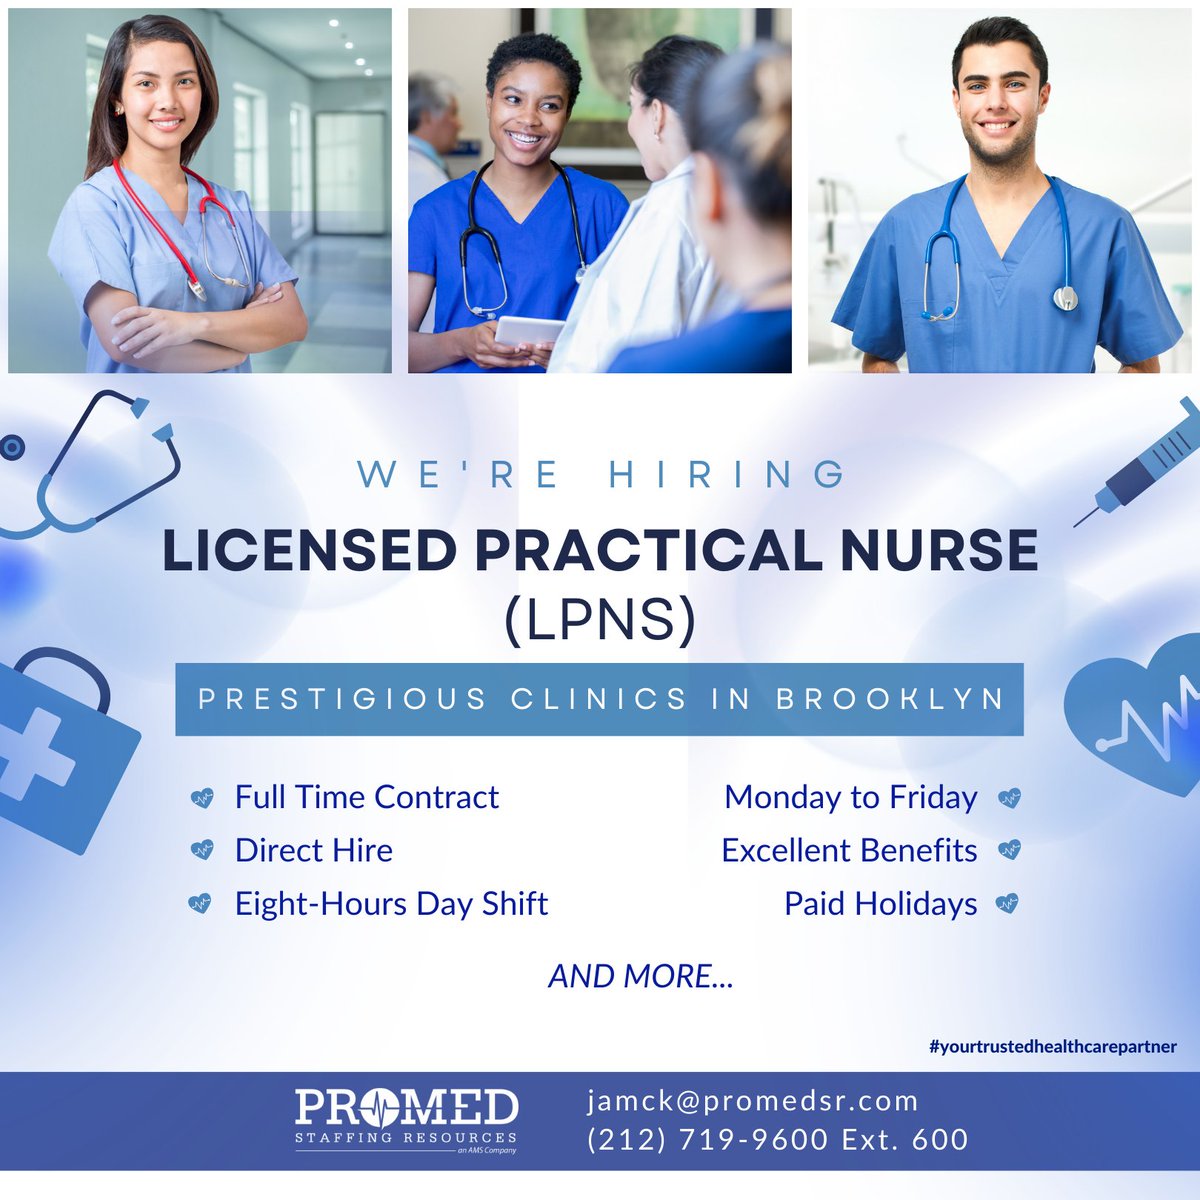 Promed Staffing Resources has an exciting #opportunity for a #fulltime, #temptohireposition as a #licensedpracticalnurse in prestigious #clinics throughout #brooklyn. Please contact Jacquelynn Mack-Torres at jmack@promedsr.com 

#lpnjobs #brooklynjobs #nursing #promedsr #hiring